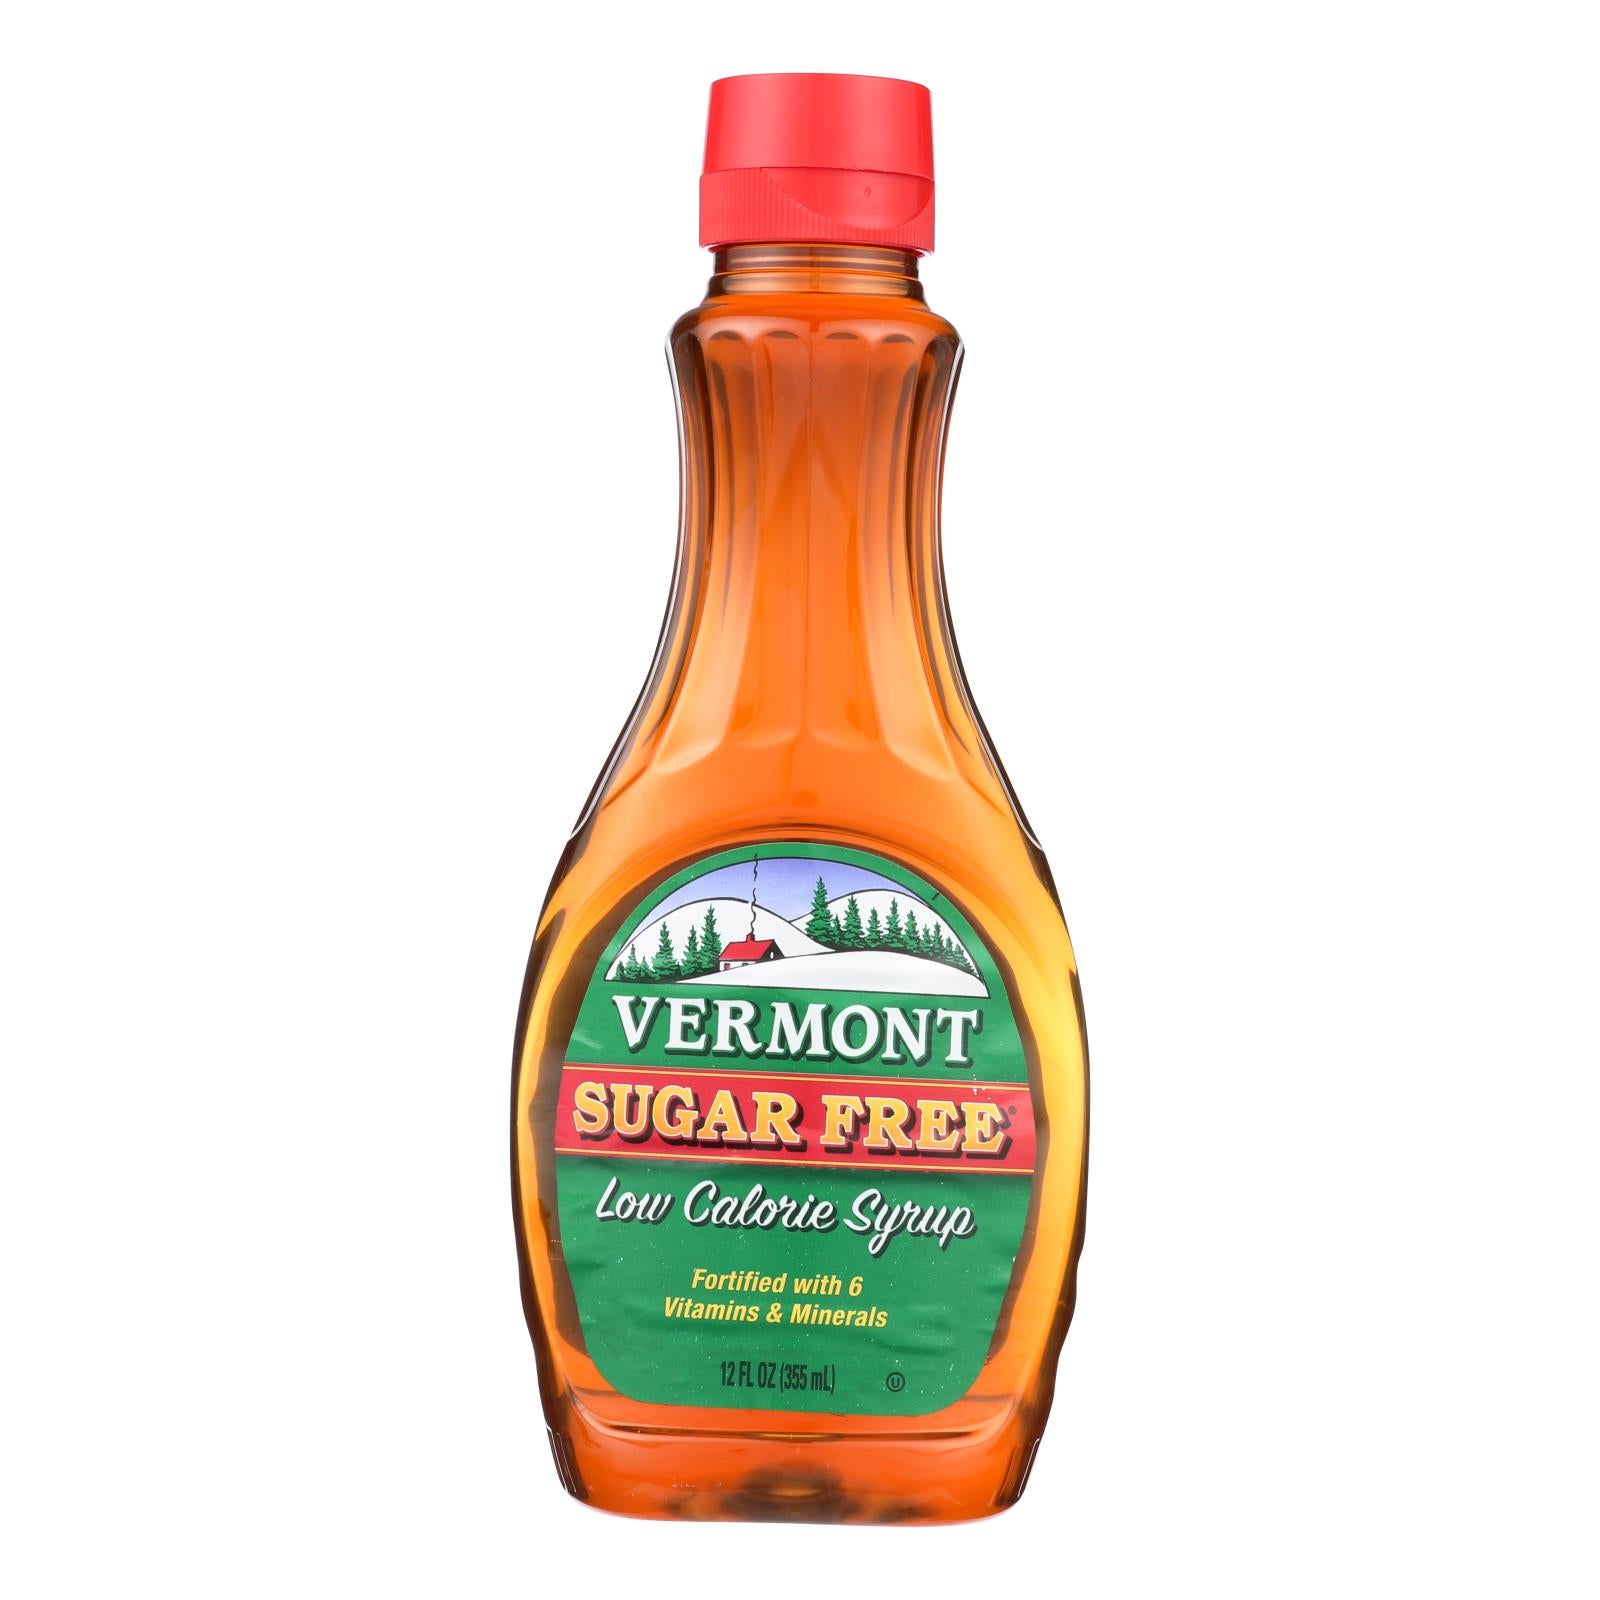 Maple Grove Farms - Vermont Sugar Free Low Calorie Syrup - Case Of 12 - 12 Fl Oz.